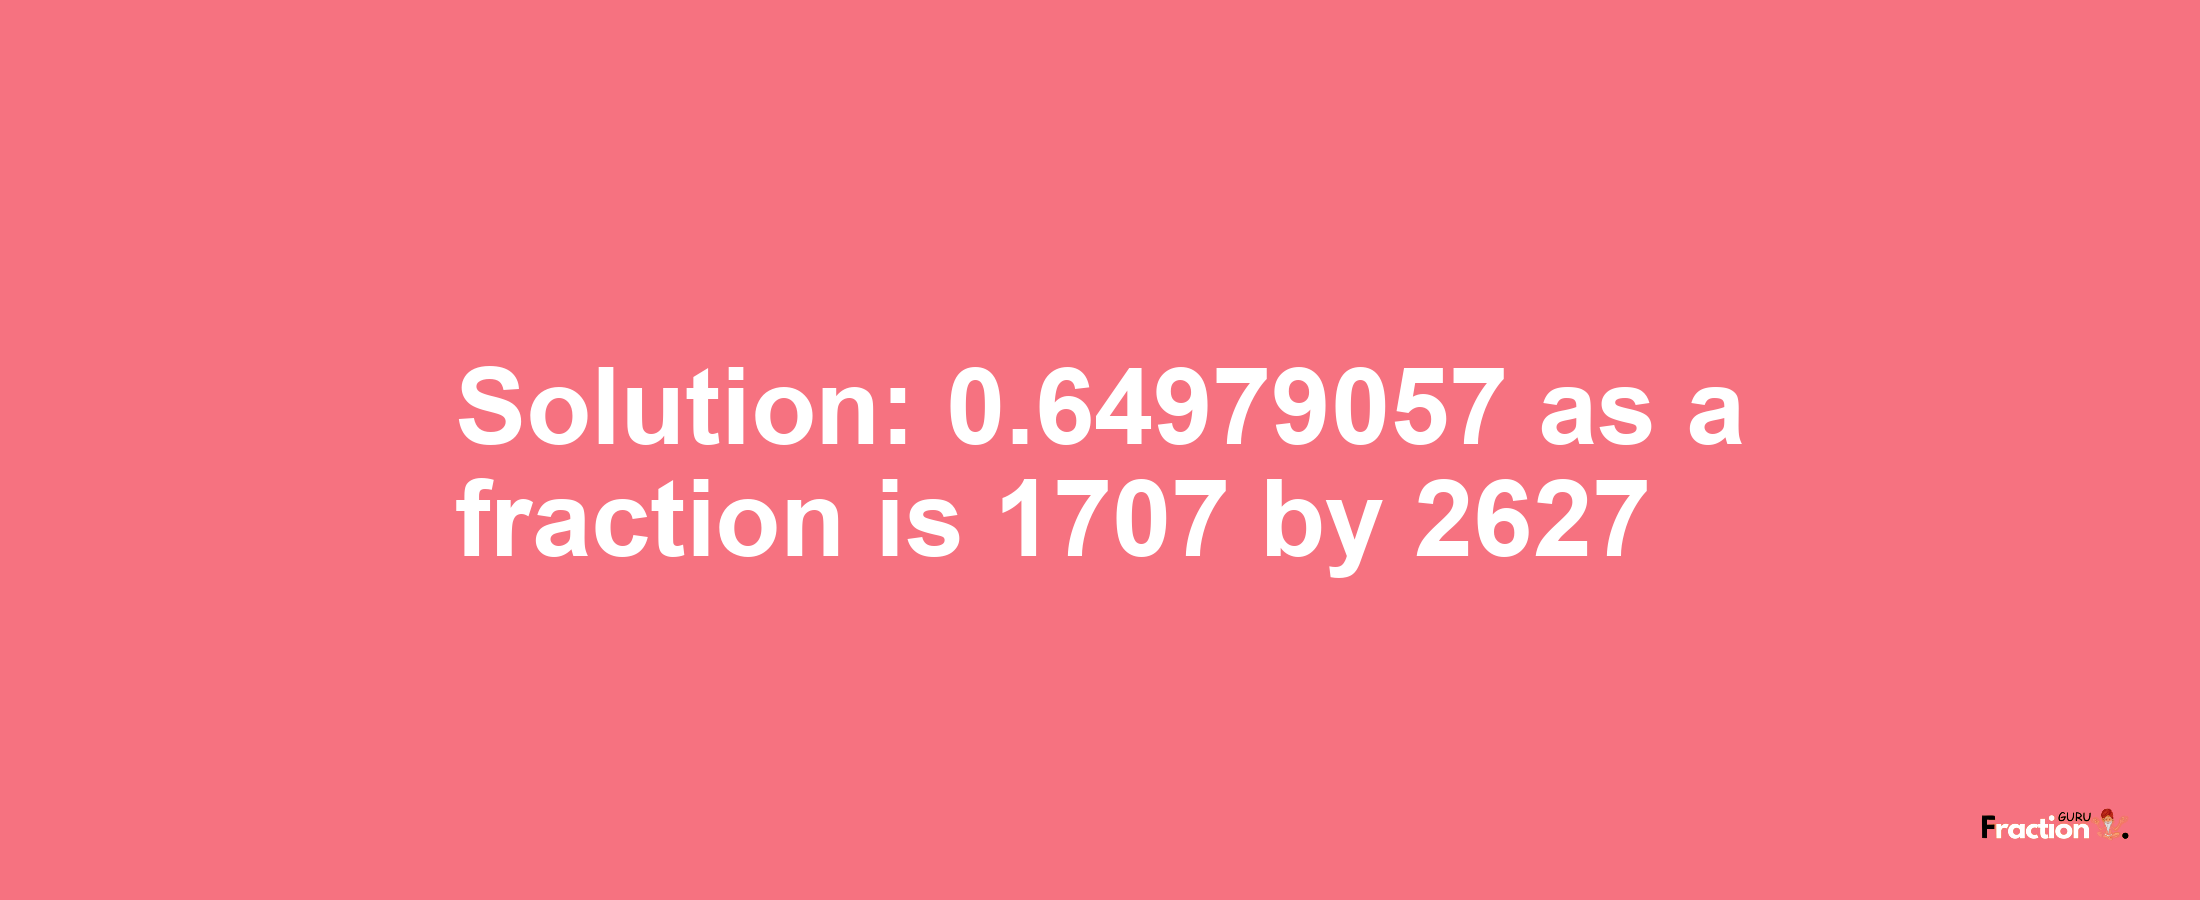 Solution:0.64979057 as a fraction is 1707/2627